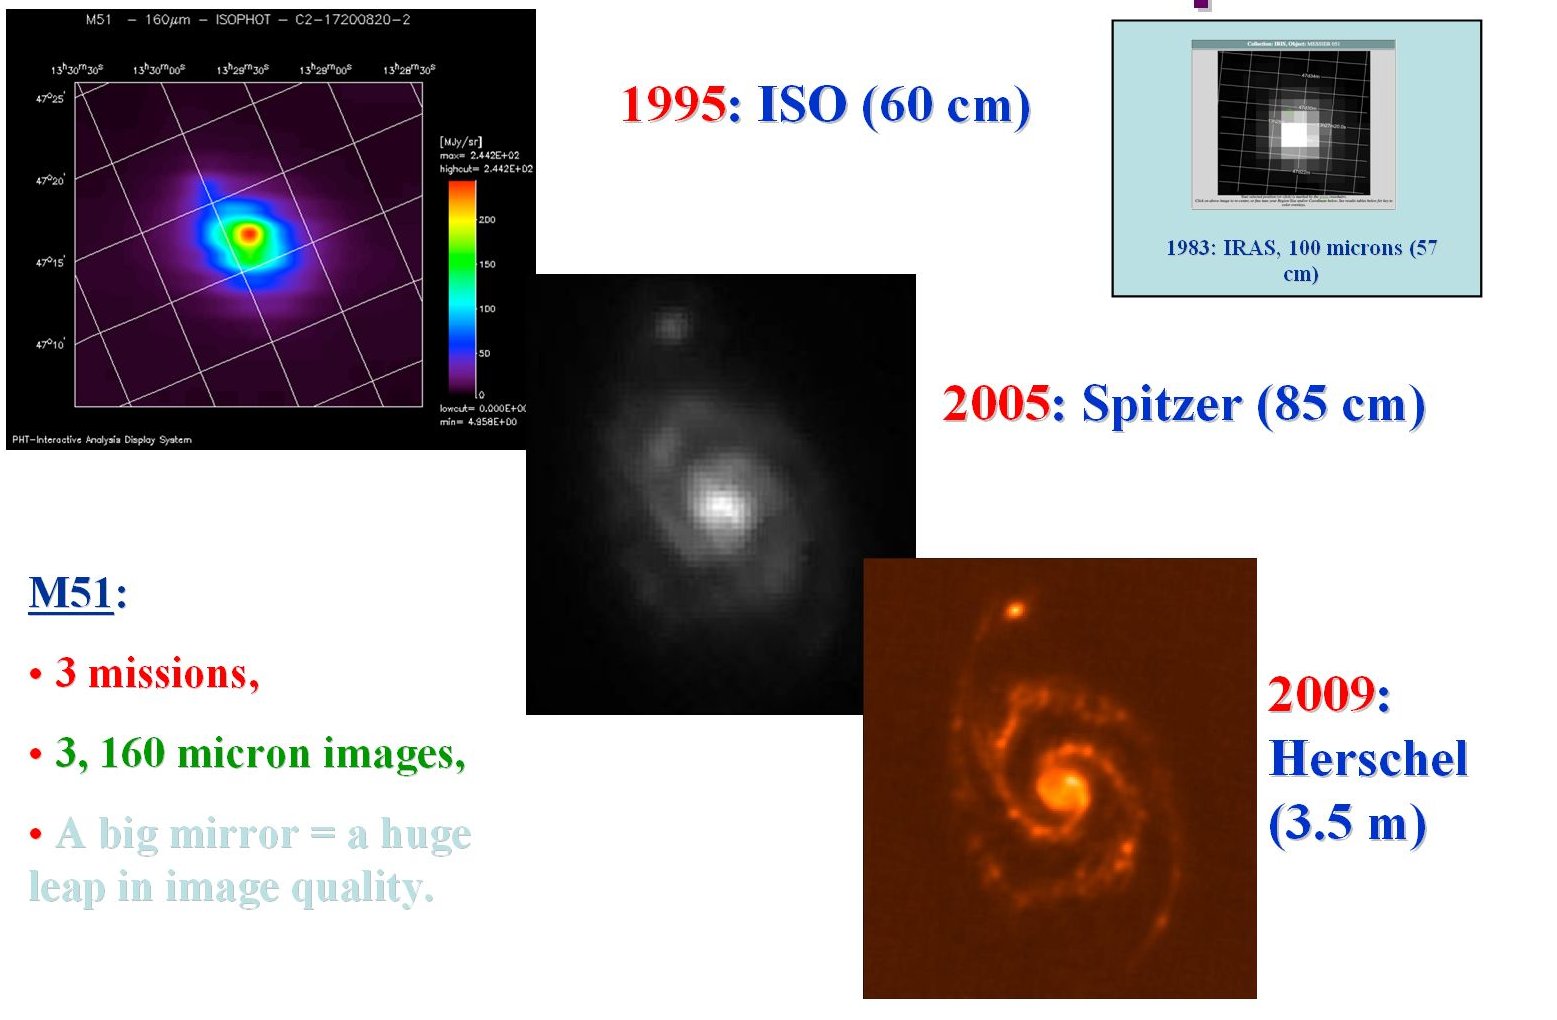 A comparison of images of M51 at 160 microns for ISO, Spitzer and the Herschel sneak preview image, showing the improved resolution and sensitivity from Herschel's larger mirror. No comparable image exists from IRAS, which had a long wavelength cut-off of 100 microns, so the IRAS 100 micron image is shown for comparison. The comparison of images also reflects the vast improvements in detector technology over the years.